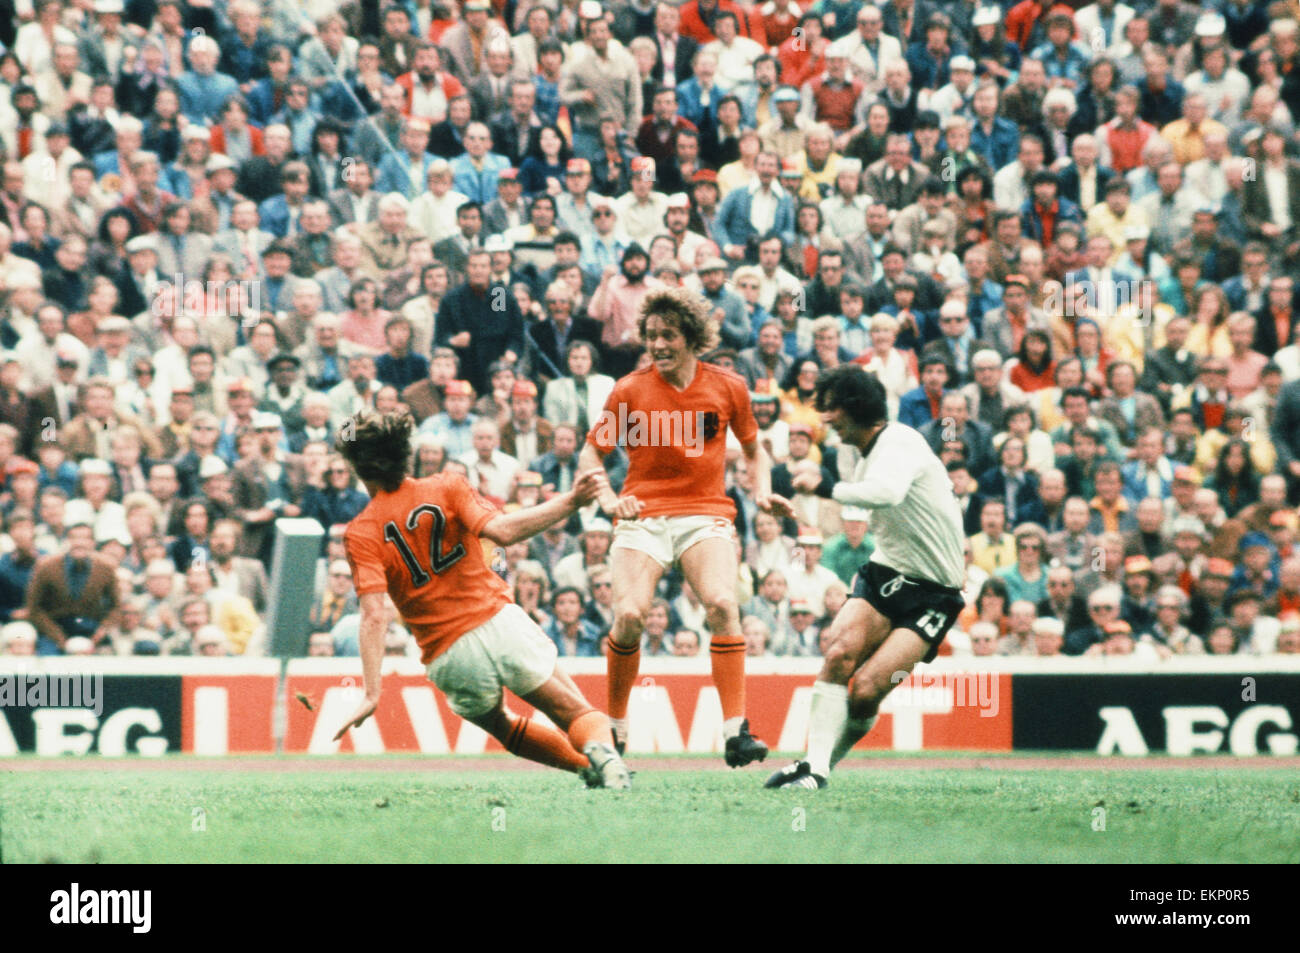 1974 World Cup Final at the Olympic Stadium in Munich. West Germany 2 v Holland 1. Gerd Muller on the turn beats beats Ruud Krol (12) and Arie Haan to score the winning goal. 7th July 1974. Stock Photo